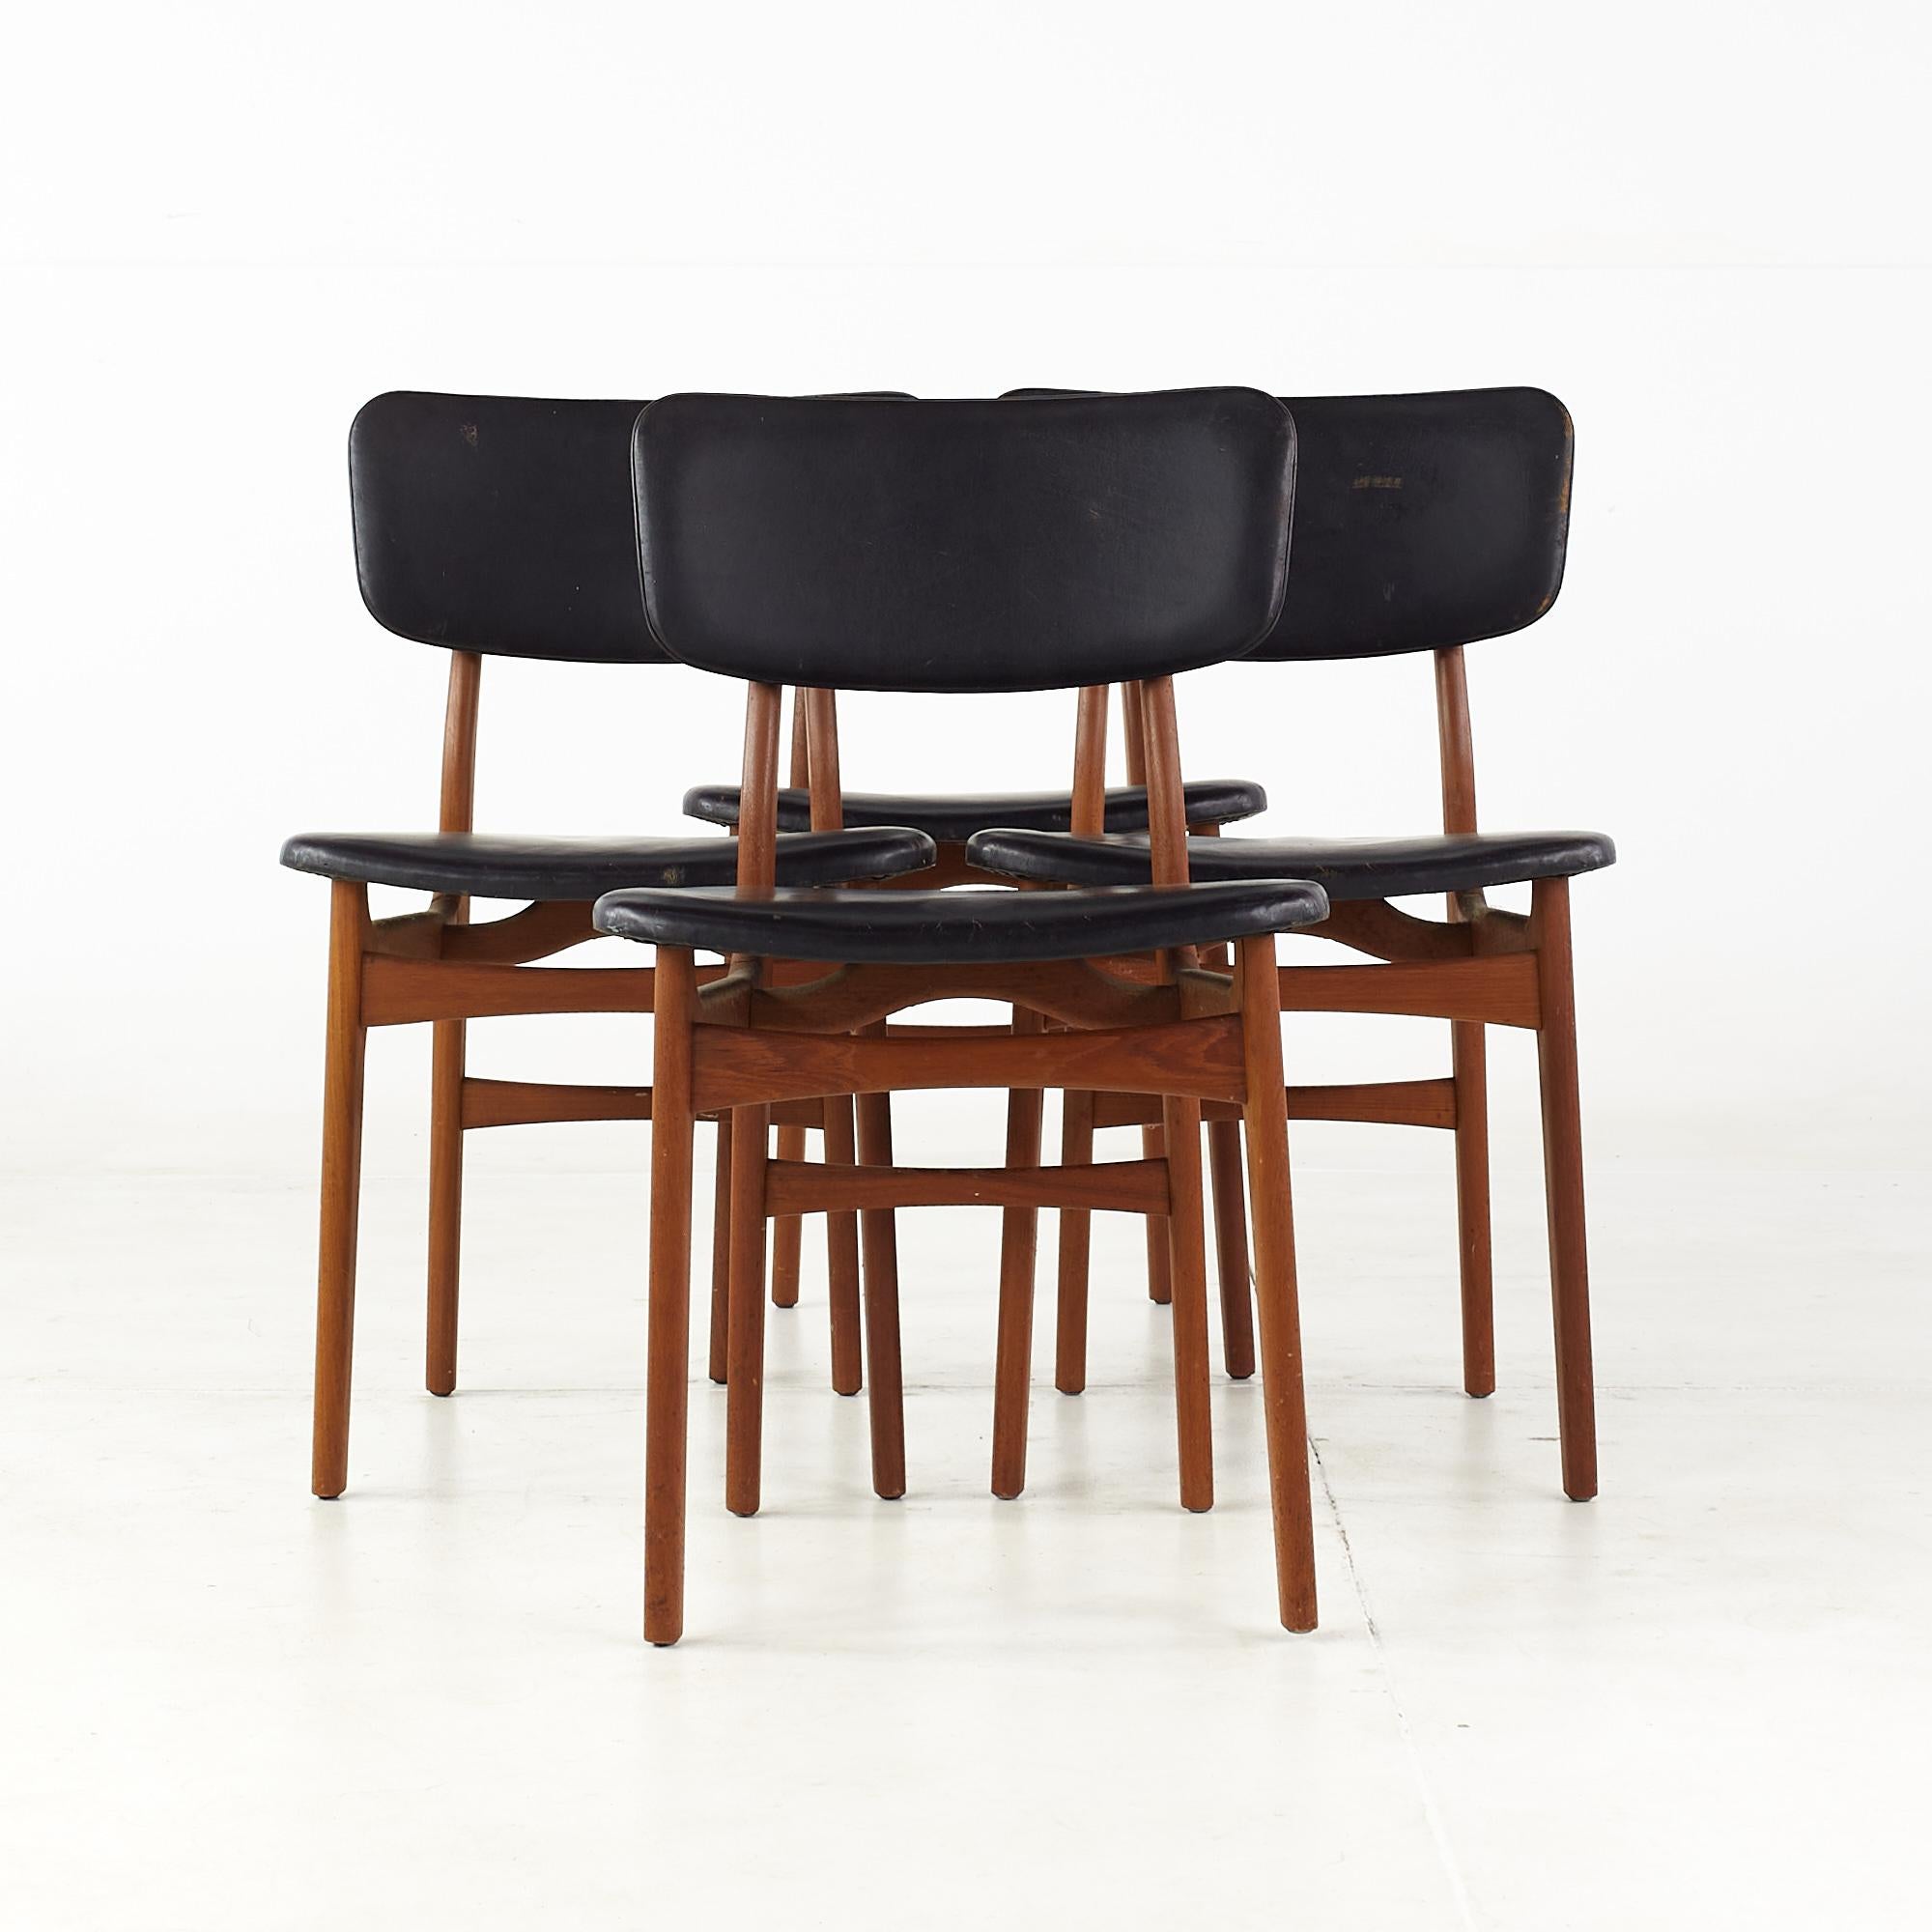 Mid century danish teak dining chairs - set of 4

These chairs measure: 18.25 wide x 19 deep x 31 inches high, with a seat height/chair clearance of 18 inches

All pieces of furniture can be had in what we call restored vintage condition. That